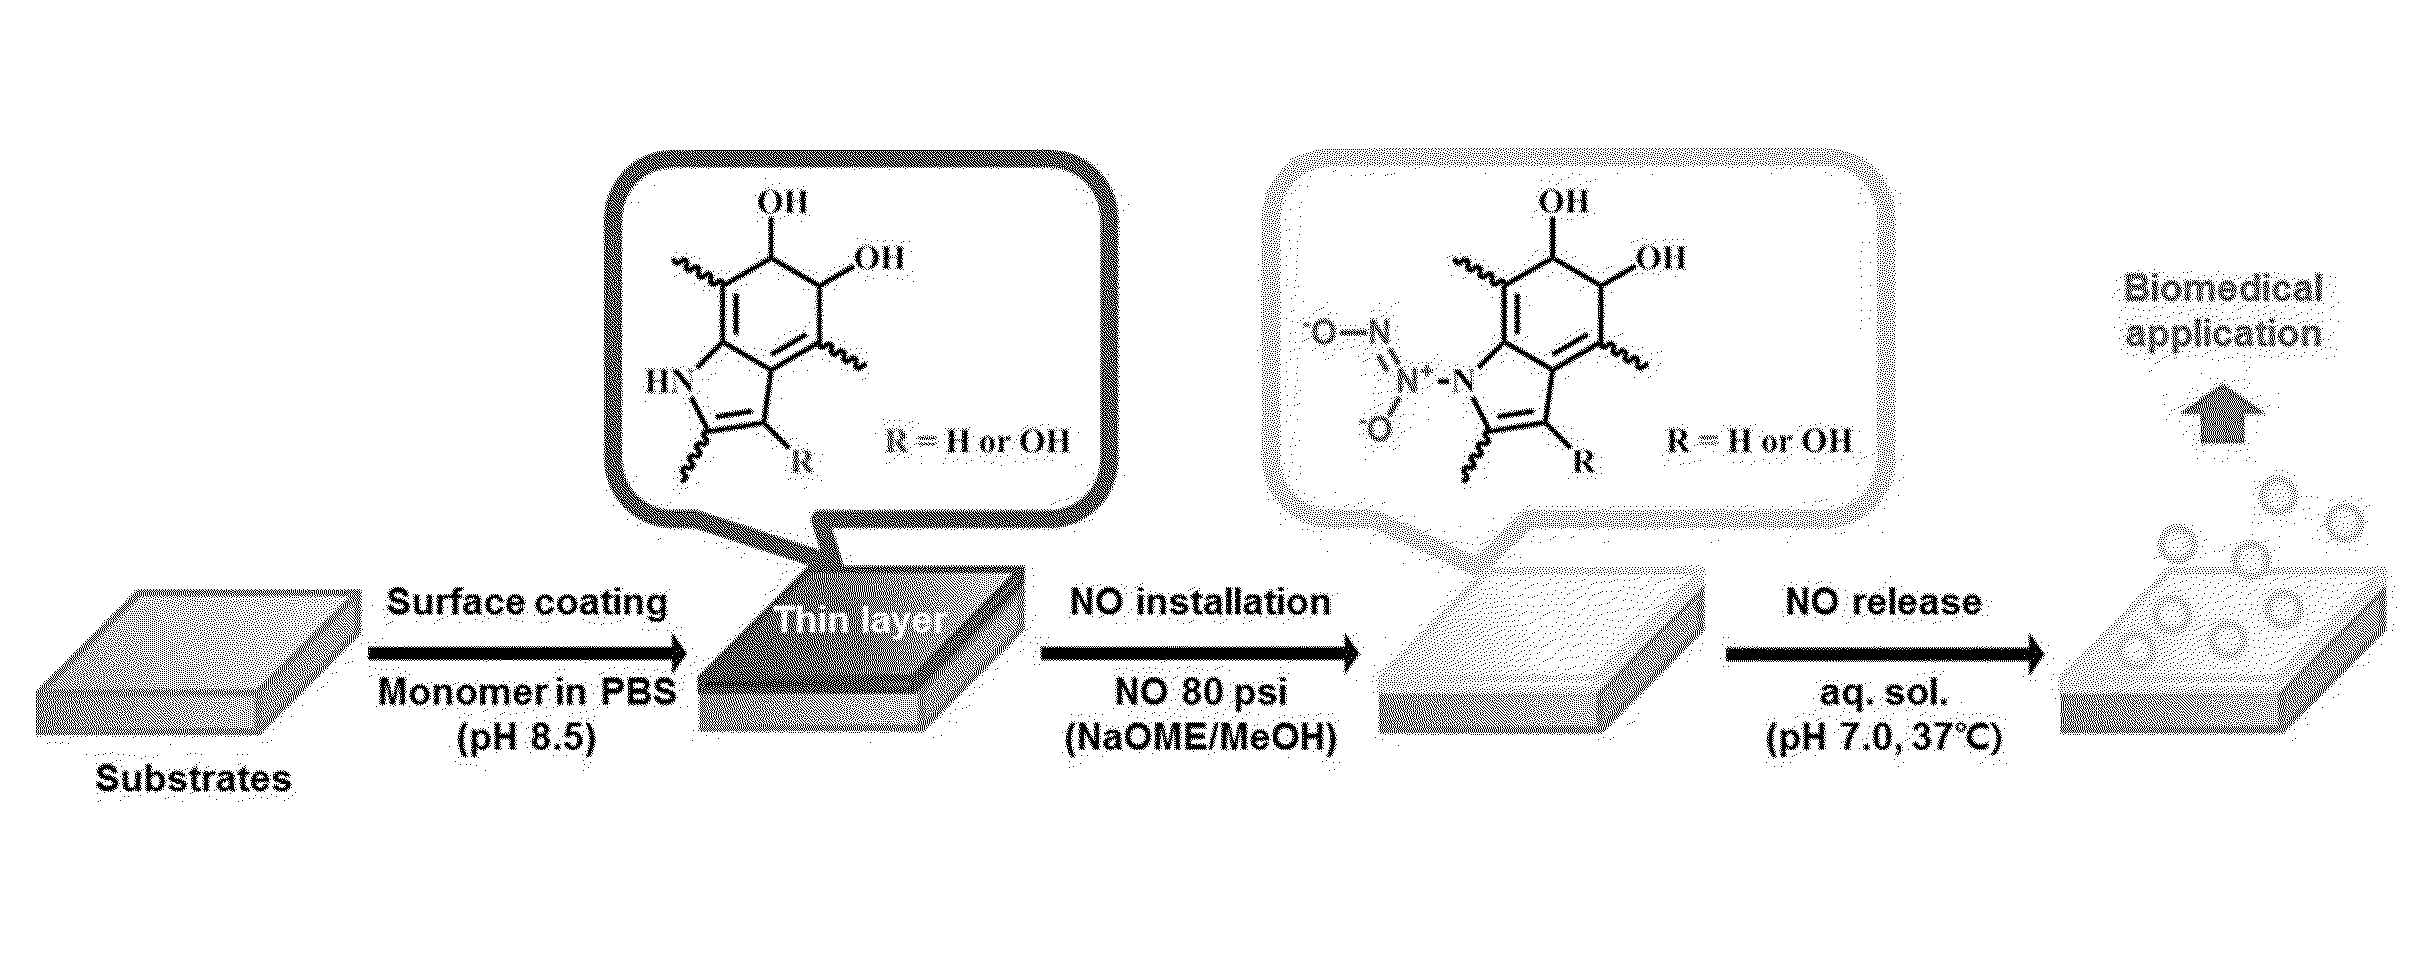 Method of preparing coating film containing nitrogen monoxide on surface of material using catecholamine